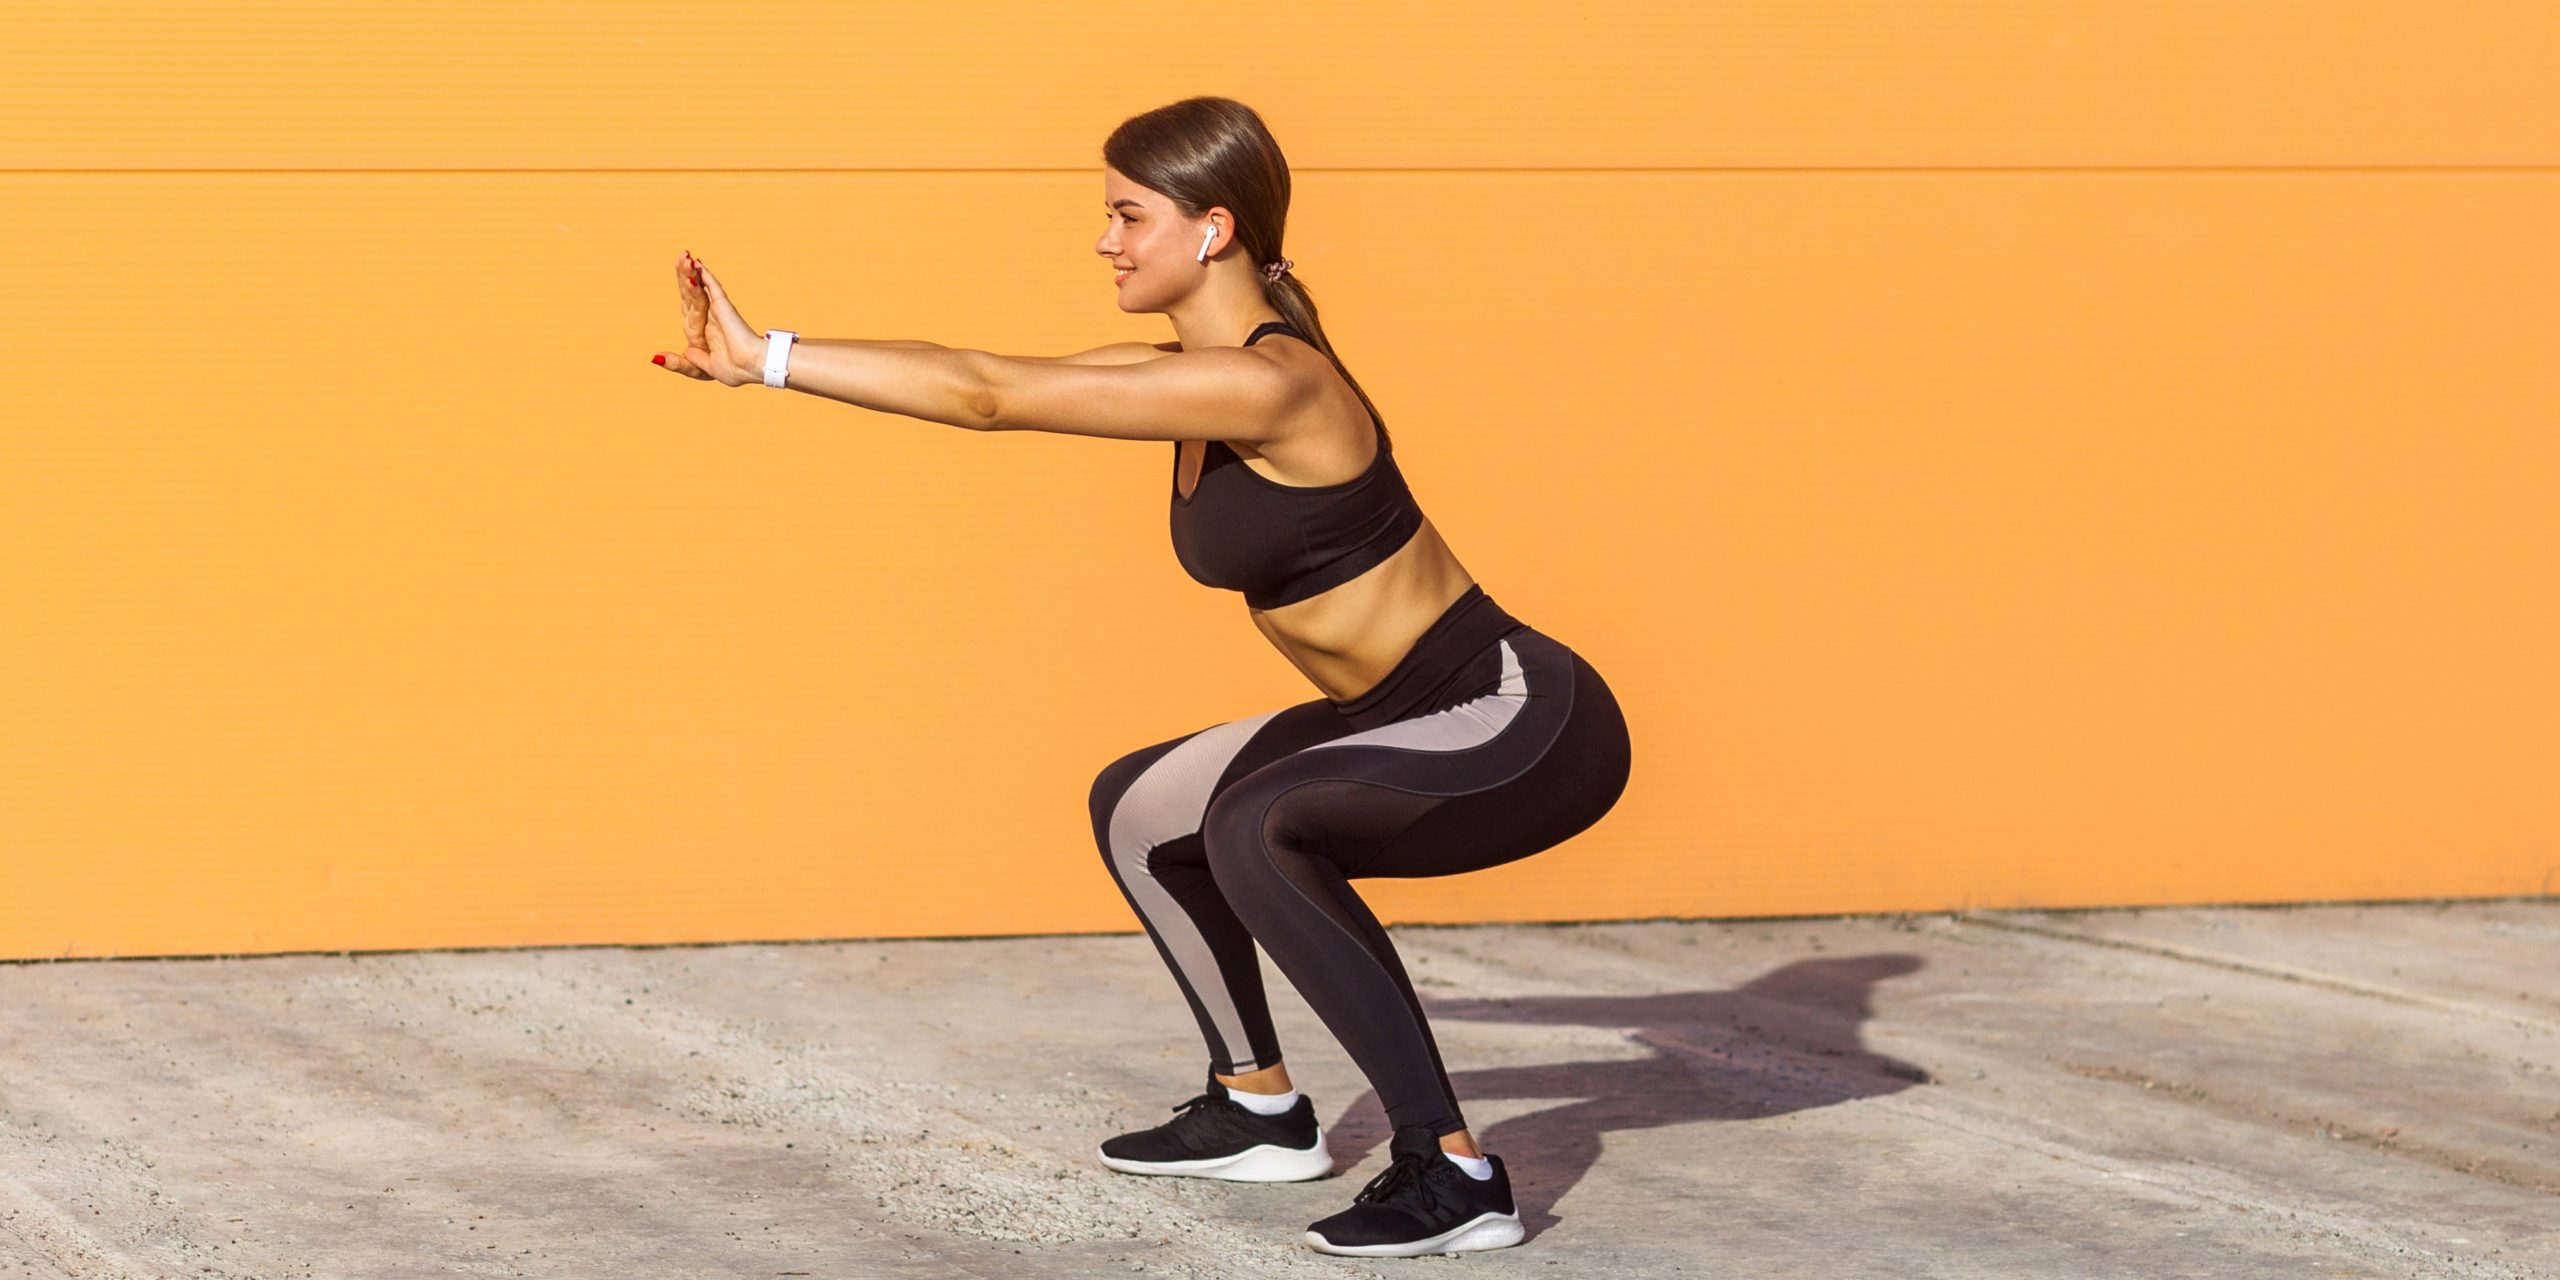 How to Do Squats Without Destroying Your Back